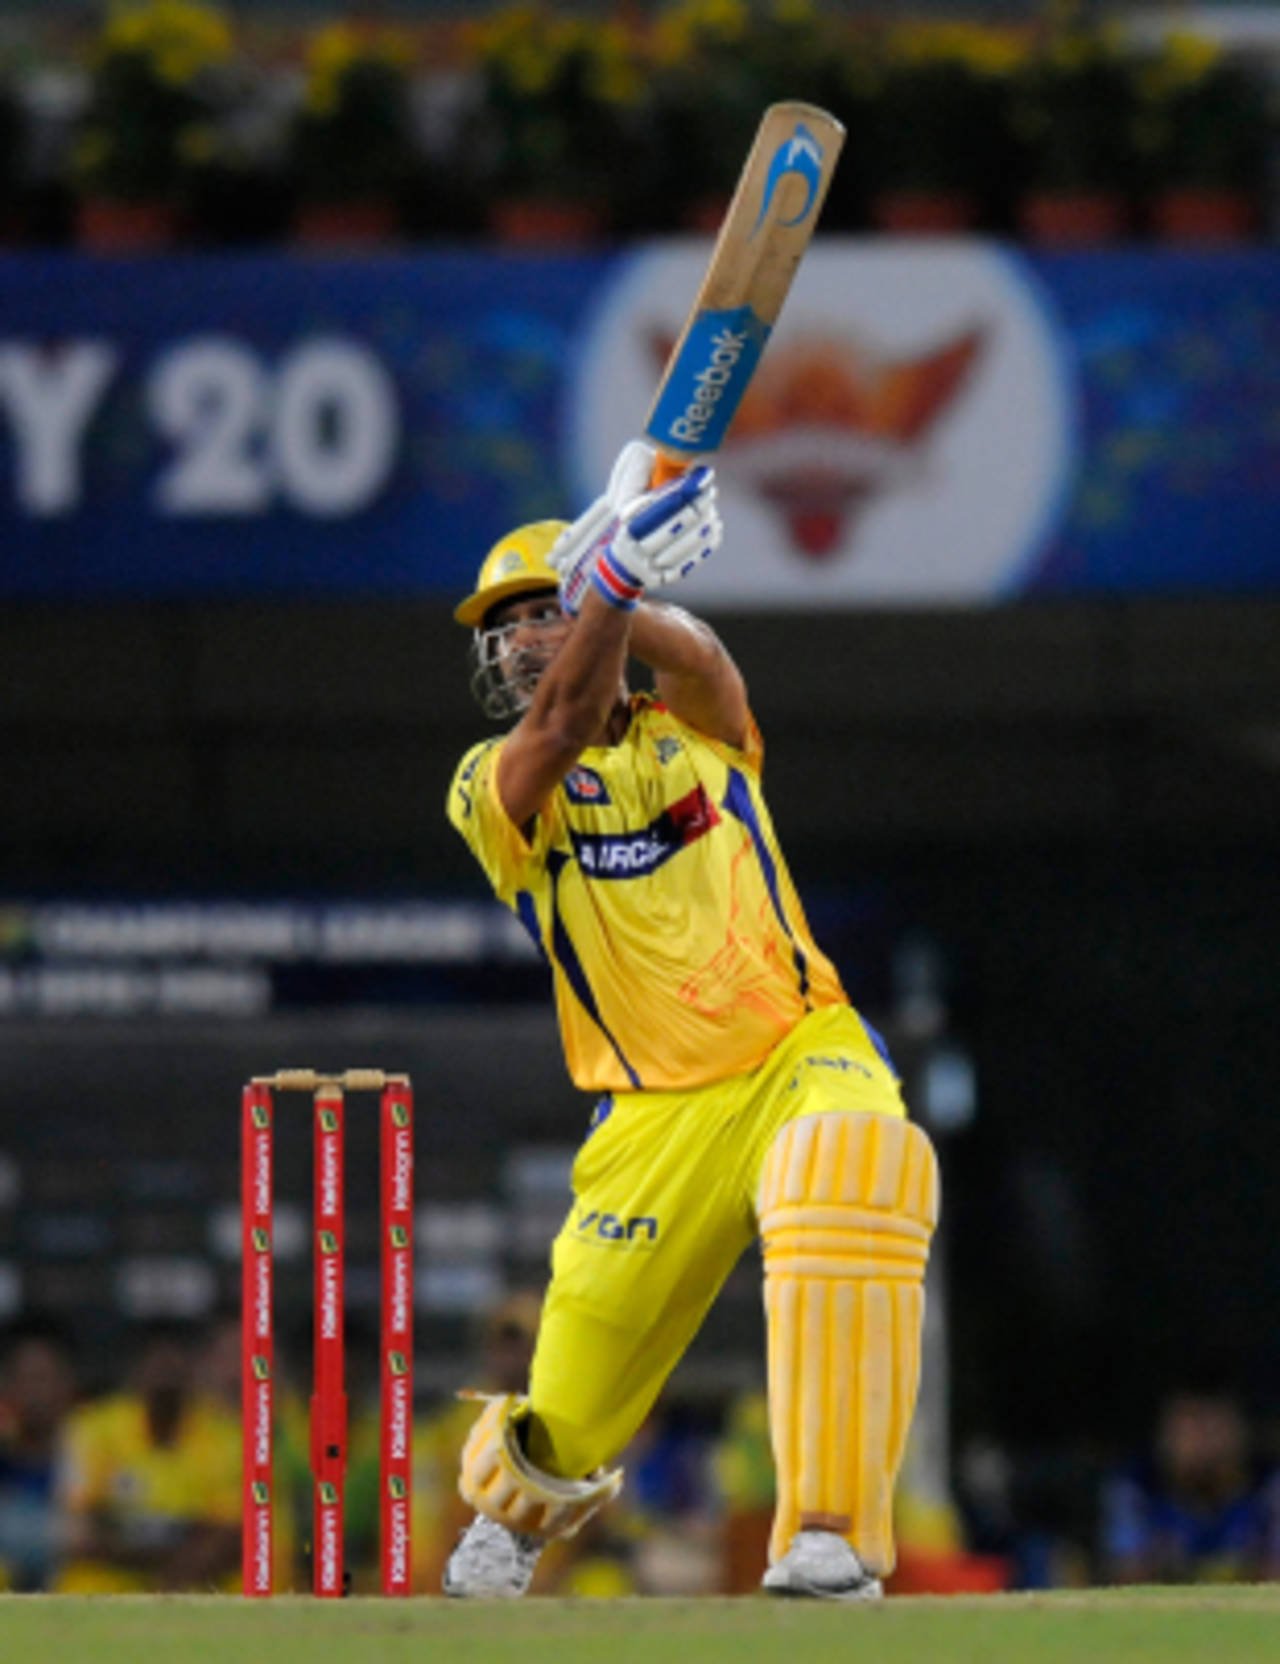 MS Dhoni muscles one through the off side, Chennai Super Kings v Sunrisers Hyderabad, Group B, Champions League 2013, Ranchi, September 26, 2013